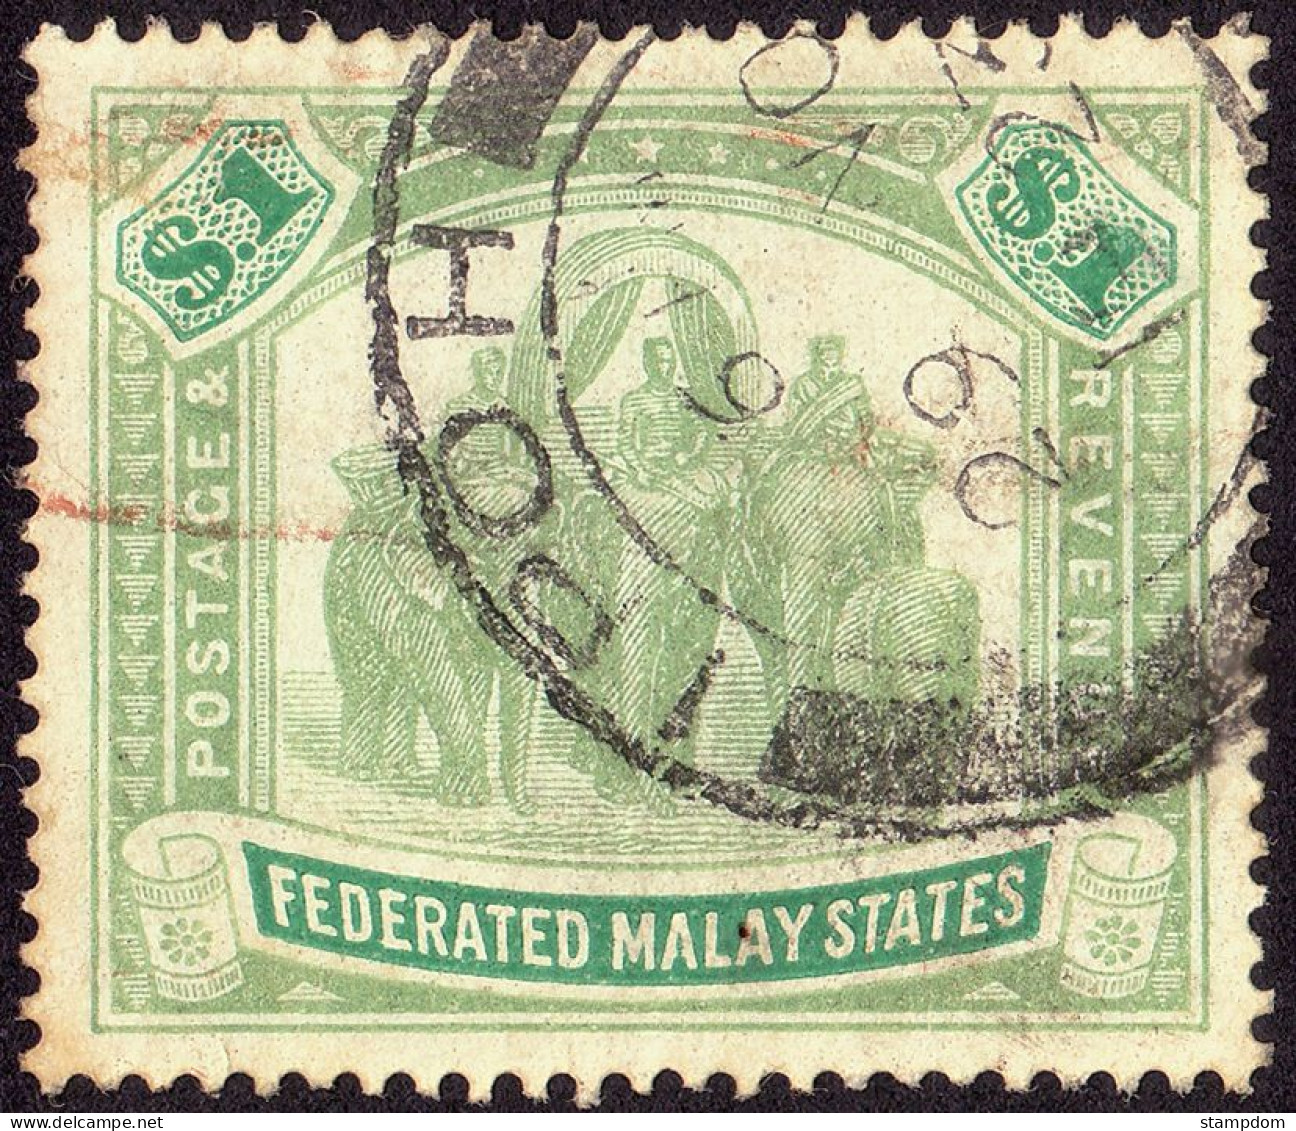 FEDERATED MALAY STATES FMS 1907 $1 Wmk.MCA Sc#34 -USED Ipoh CDS @TE95 - Federated Malay States